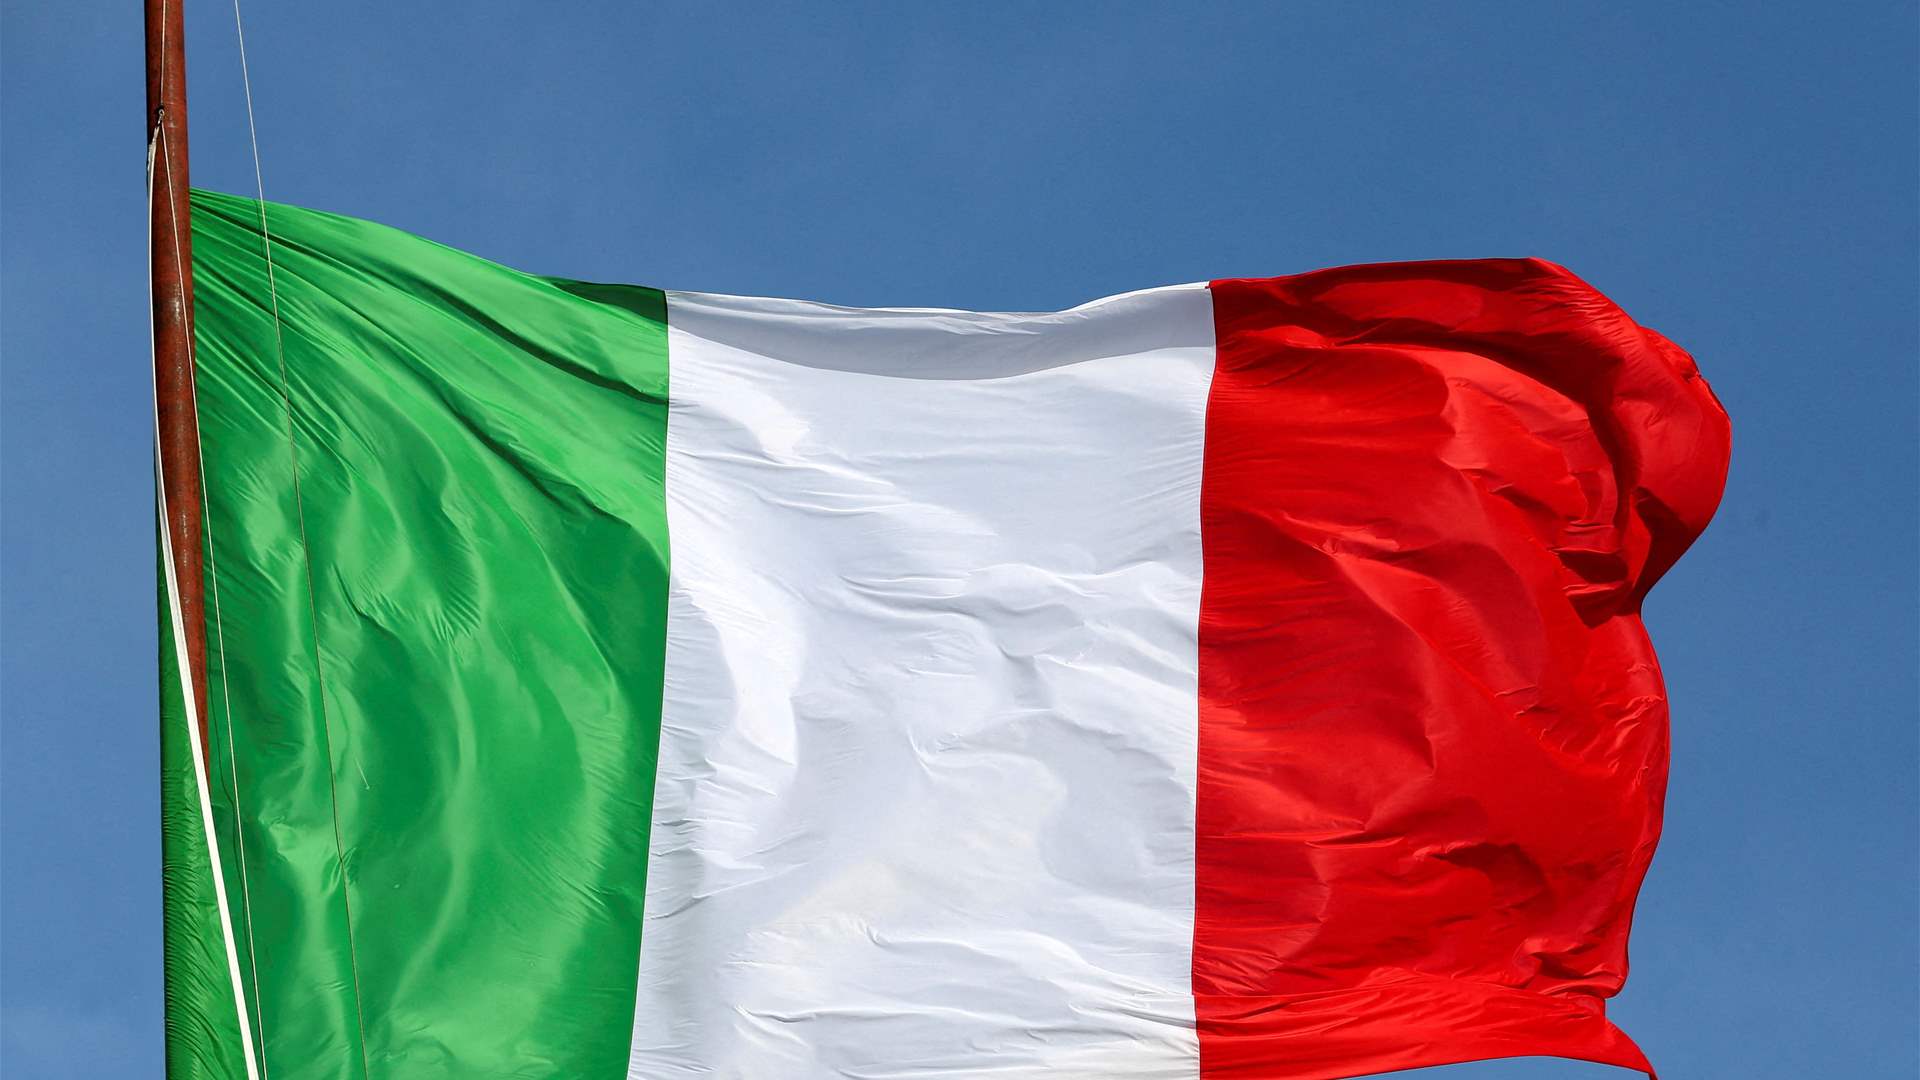 Italian public sector boss resigns after Mussolini email 